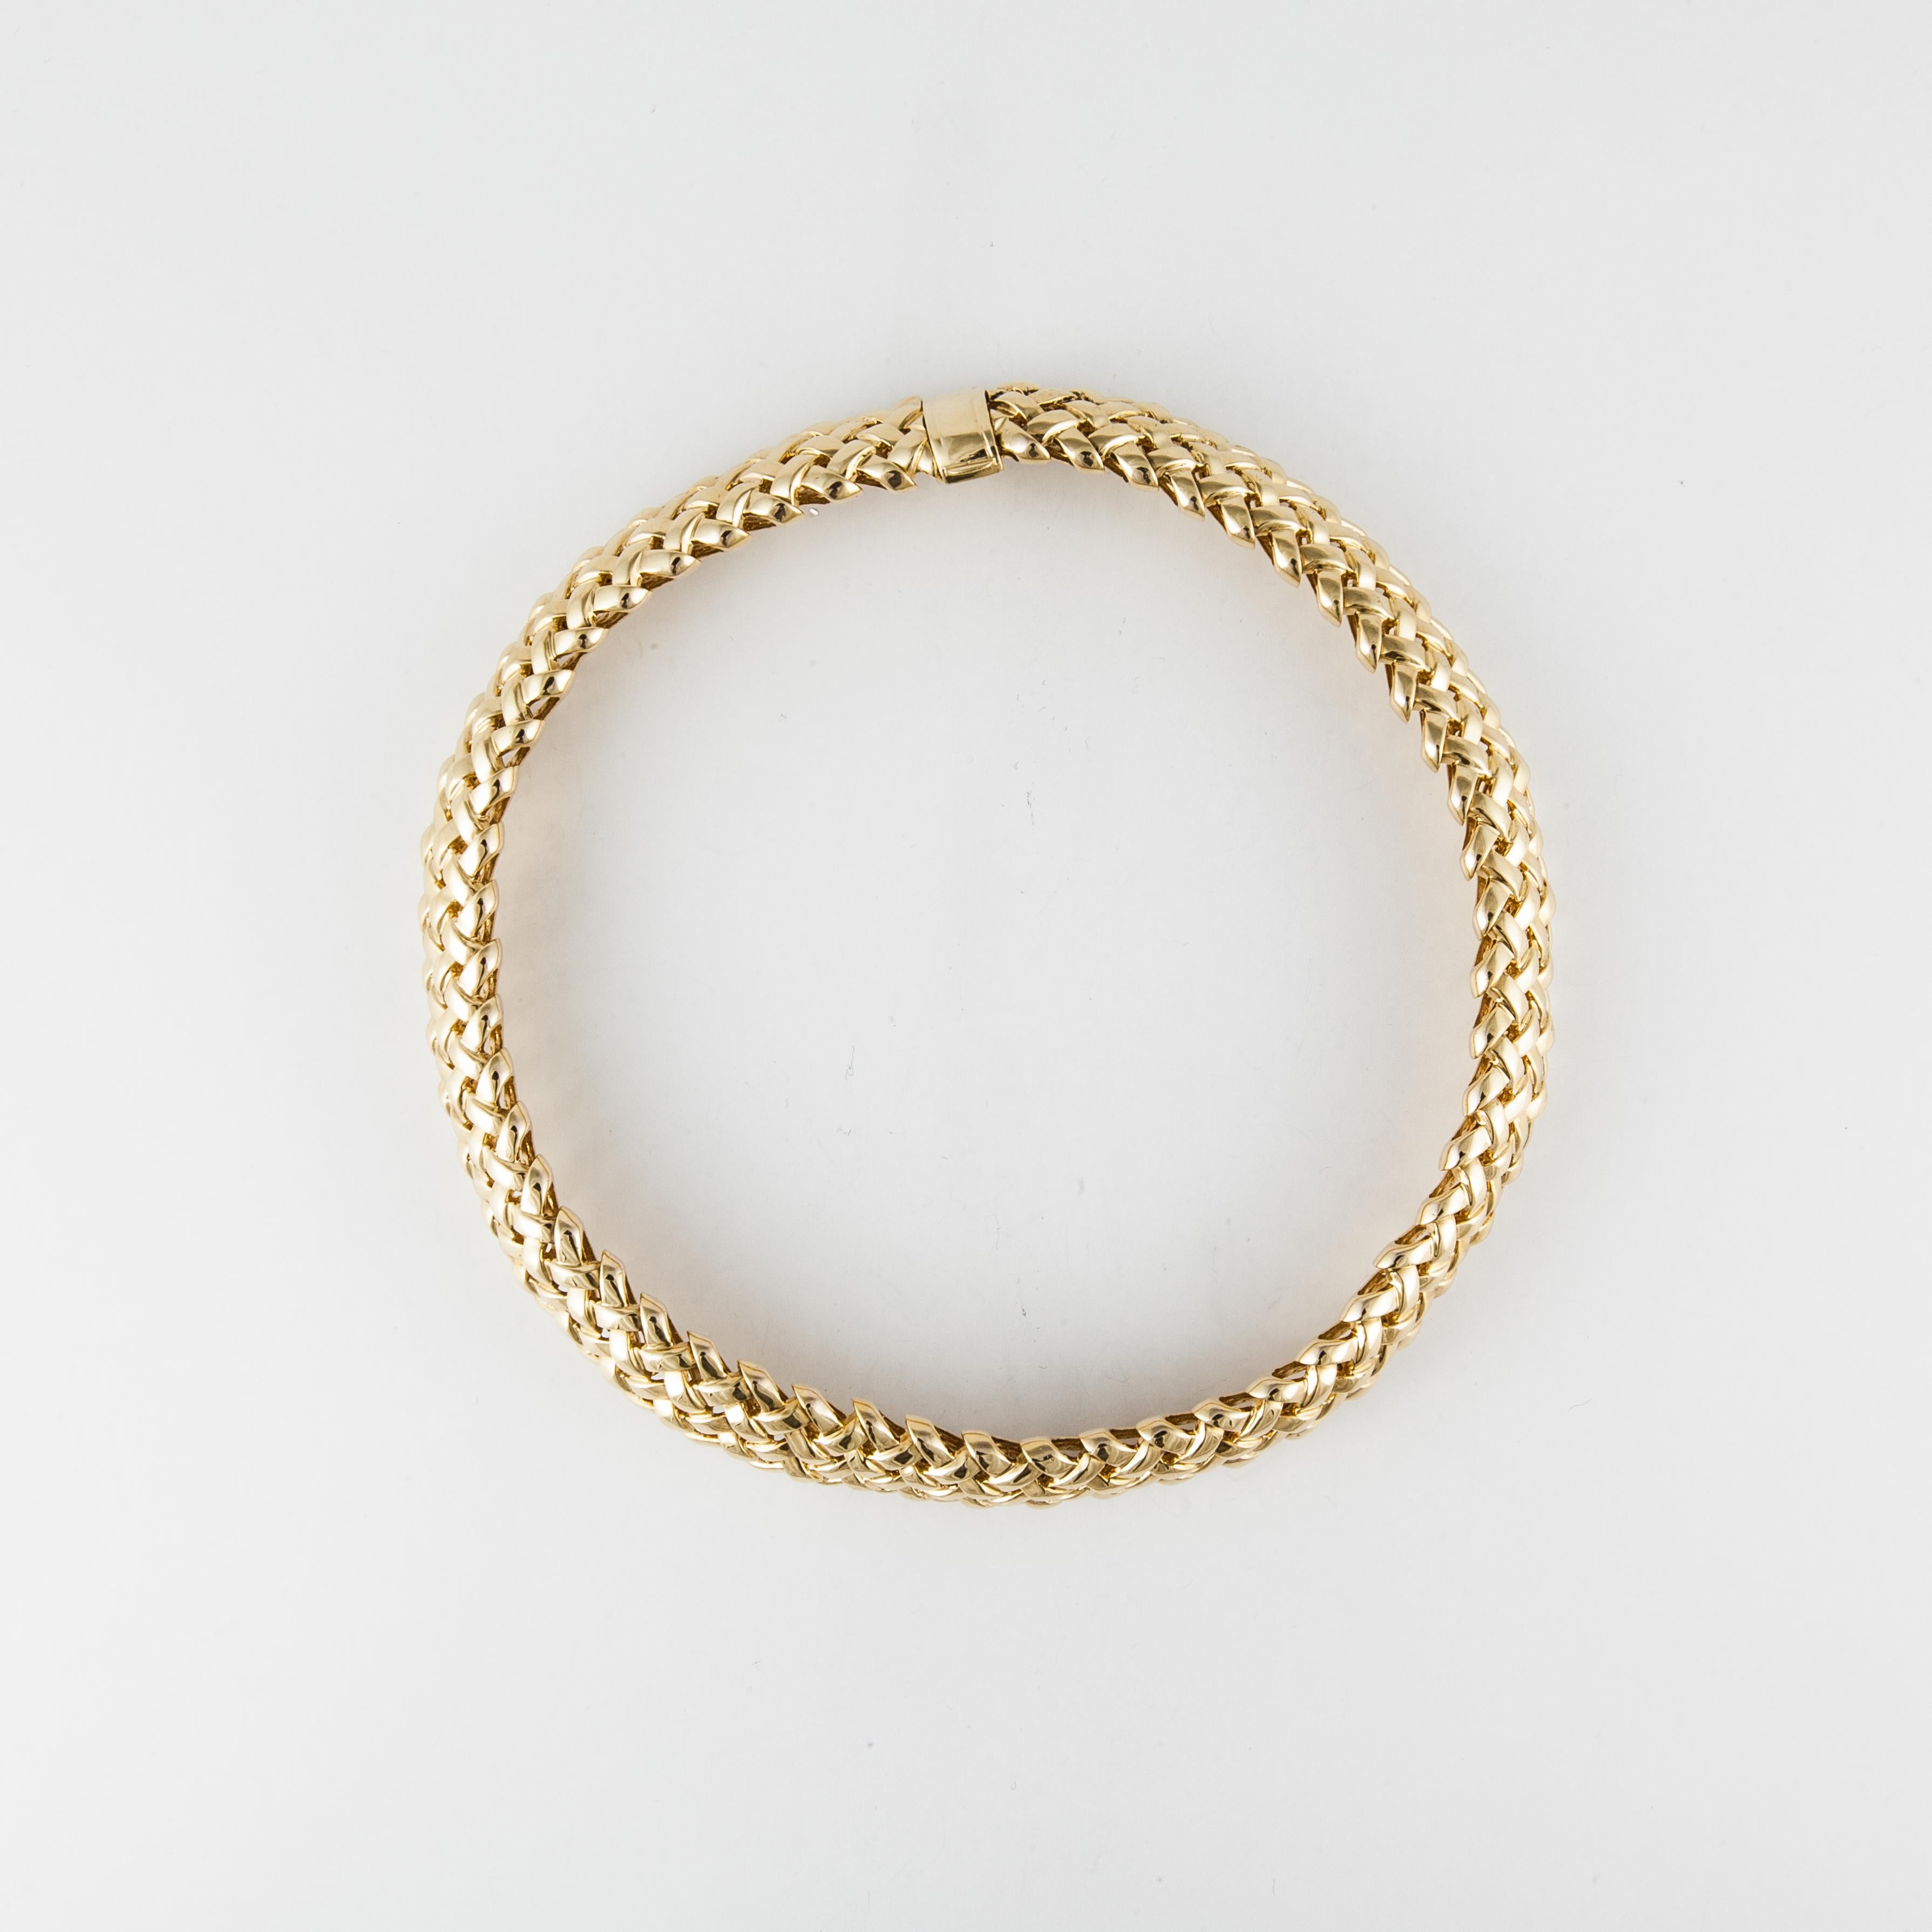  Woven necklace in 18K yellow gold.   Clasp is a fold over safety.  Measures 16